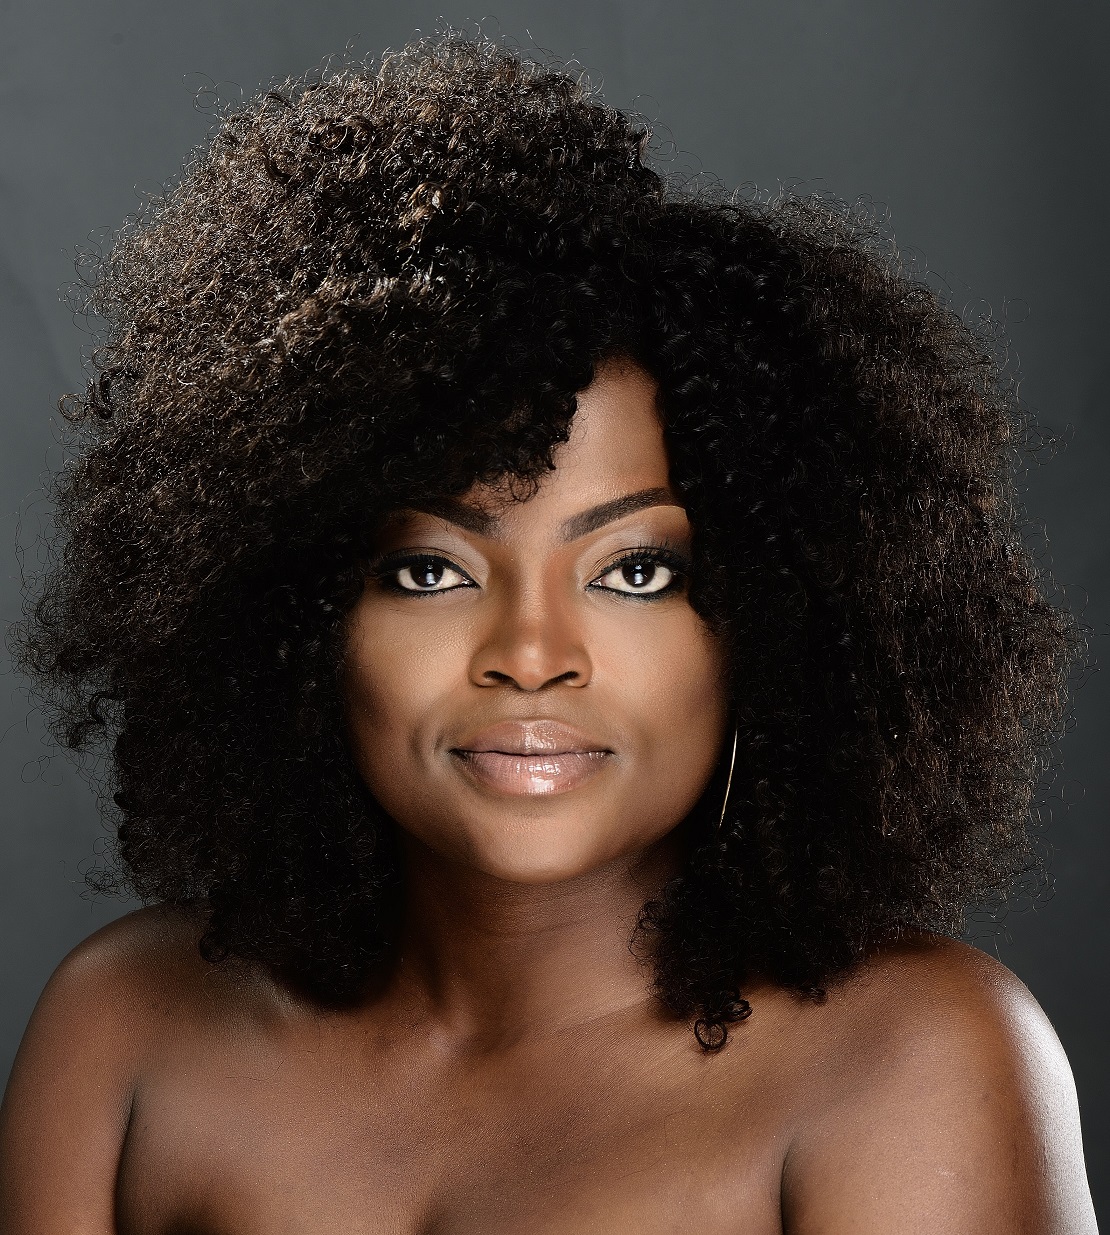 Funke Akindele Will Be Famous and Wealthy, But Without A Child: Olagorioye Faleyimu